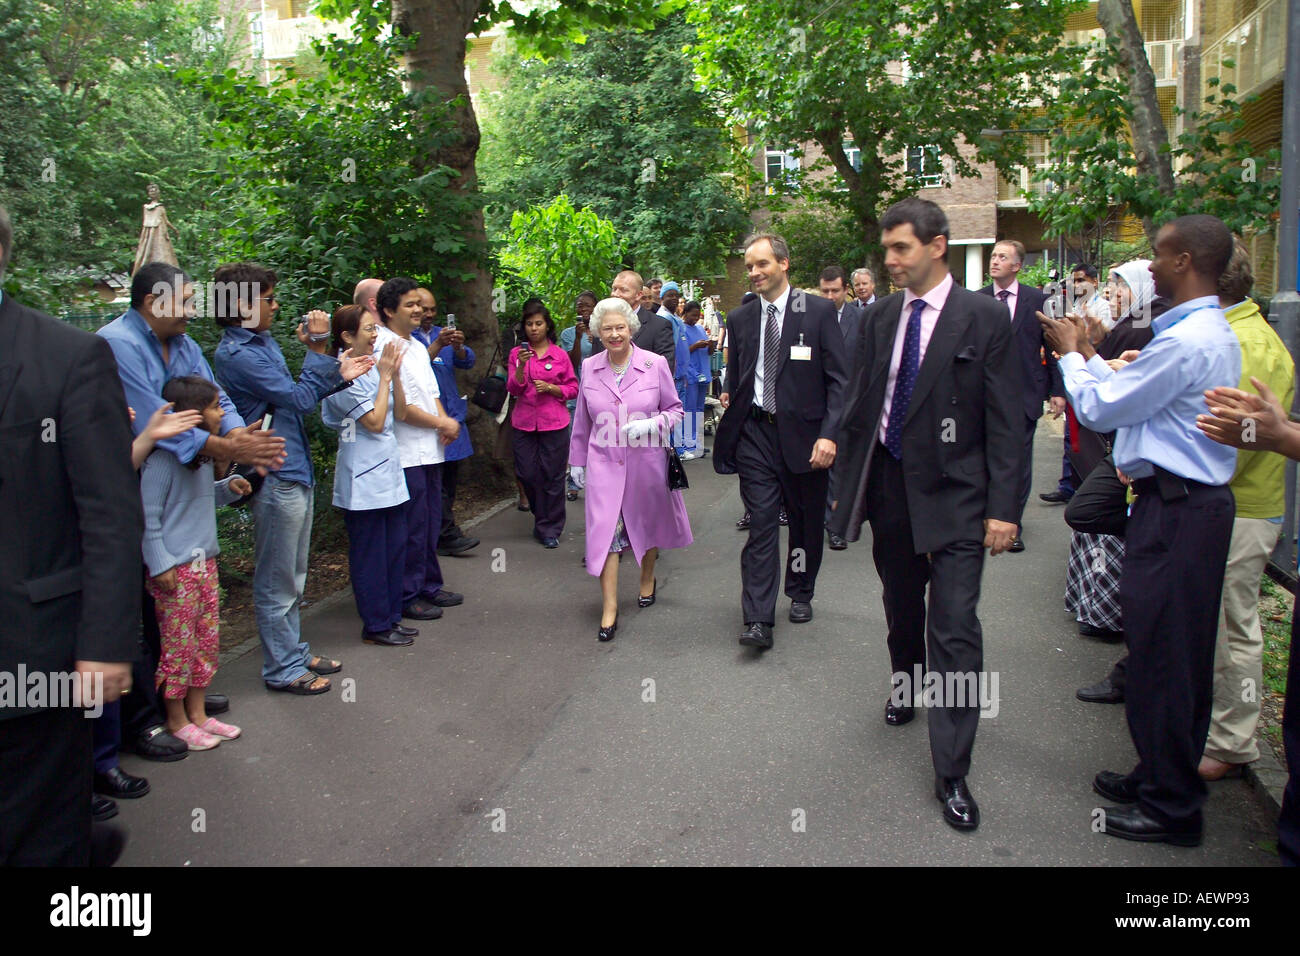 HM The Queen on a visit Stock Photo